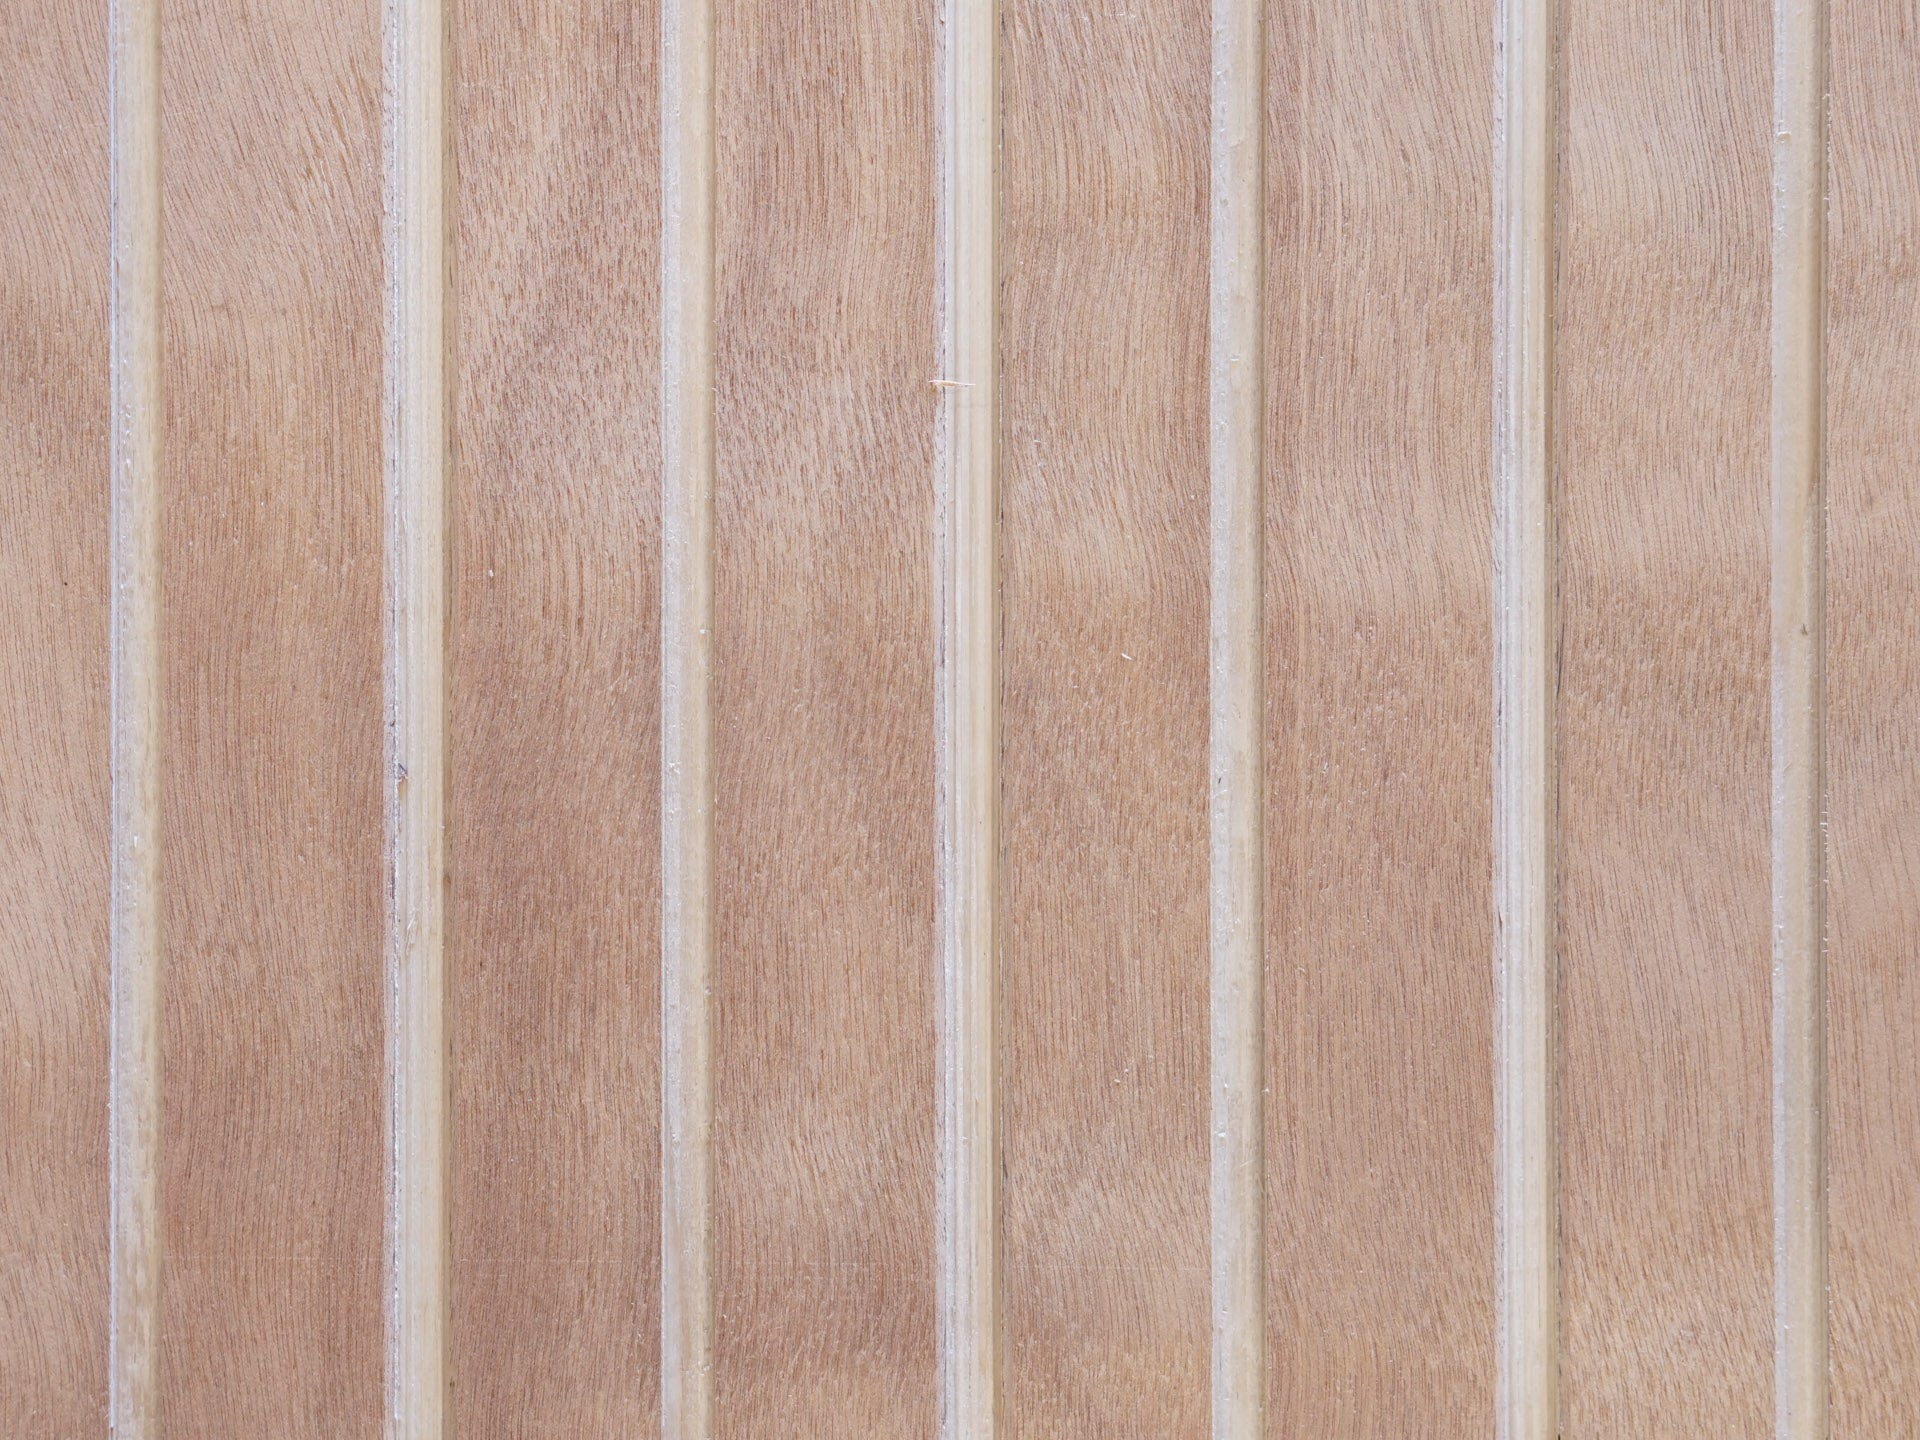 Close up of the Wideline pattern sample offered by Vintage Plywood Millworks